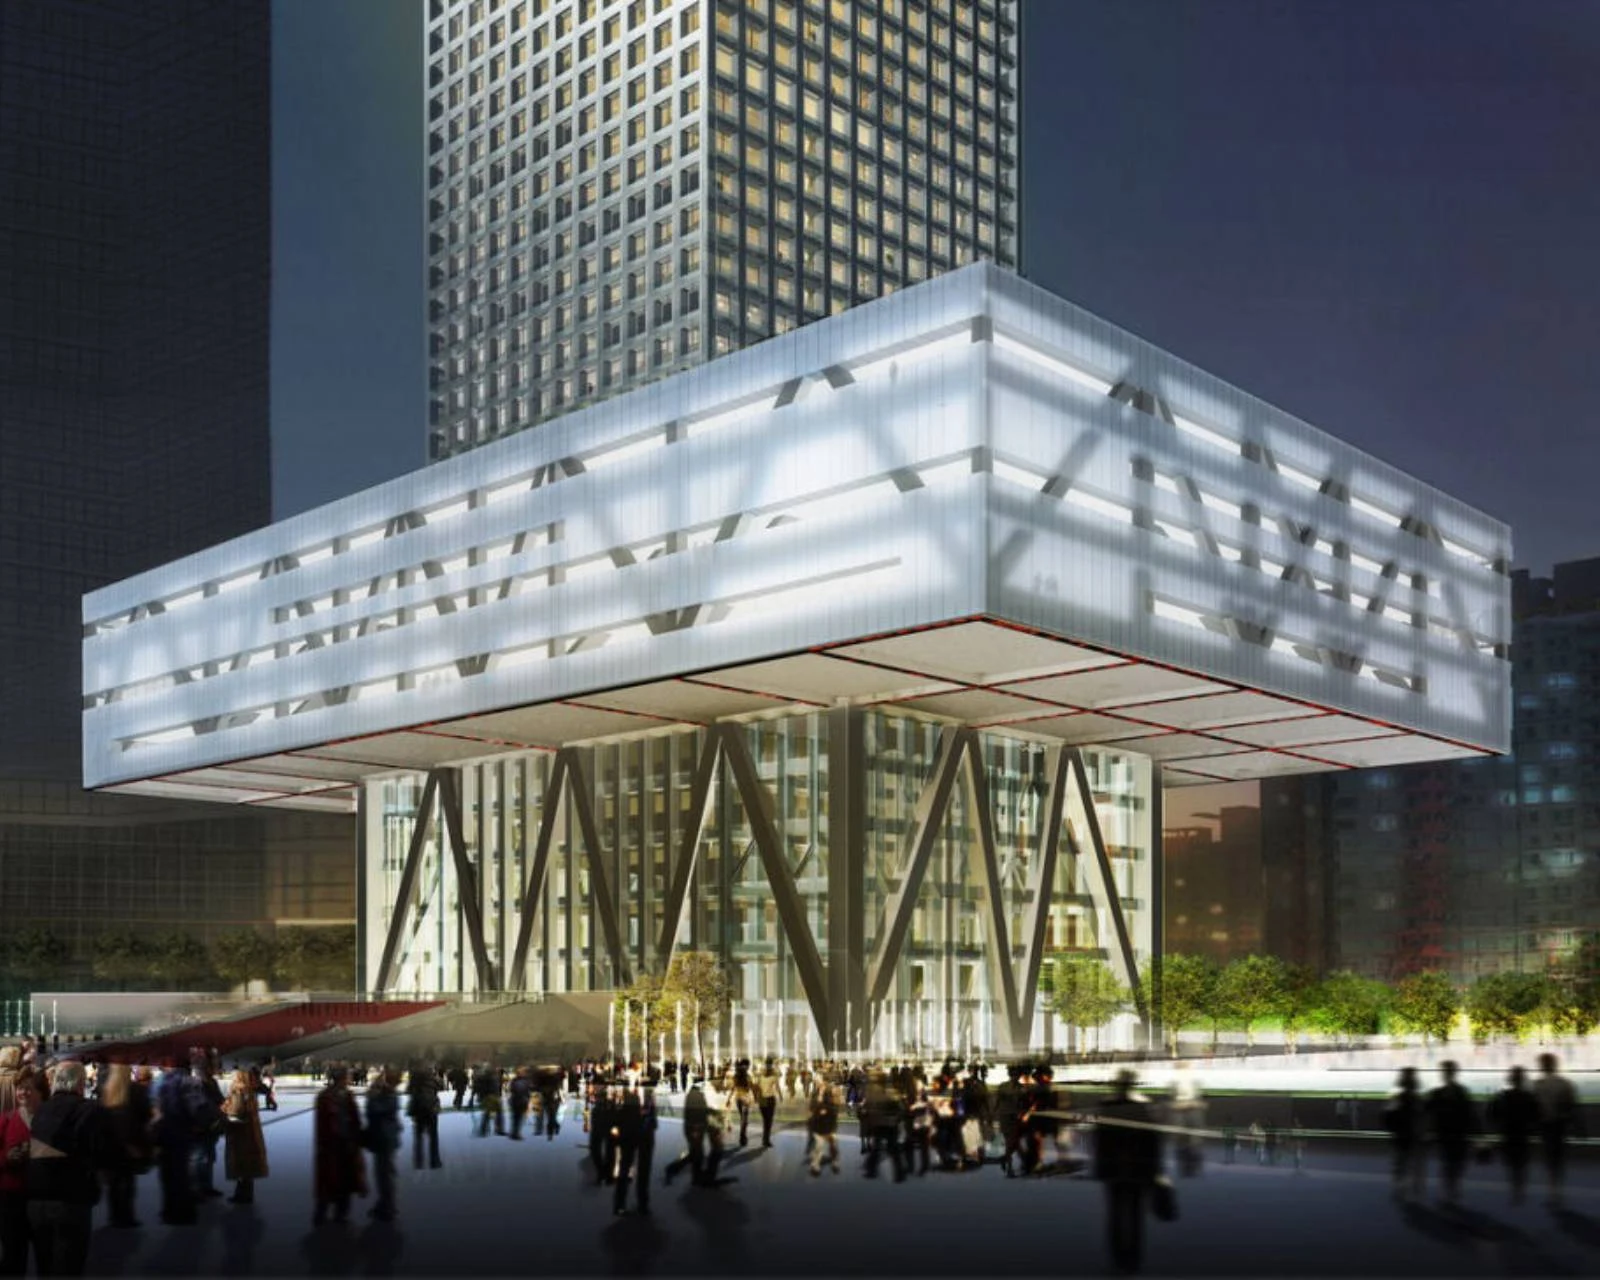 Shenzhen Stock Exchange Building by Oma